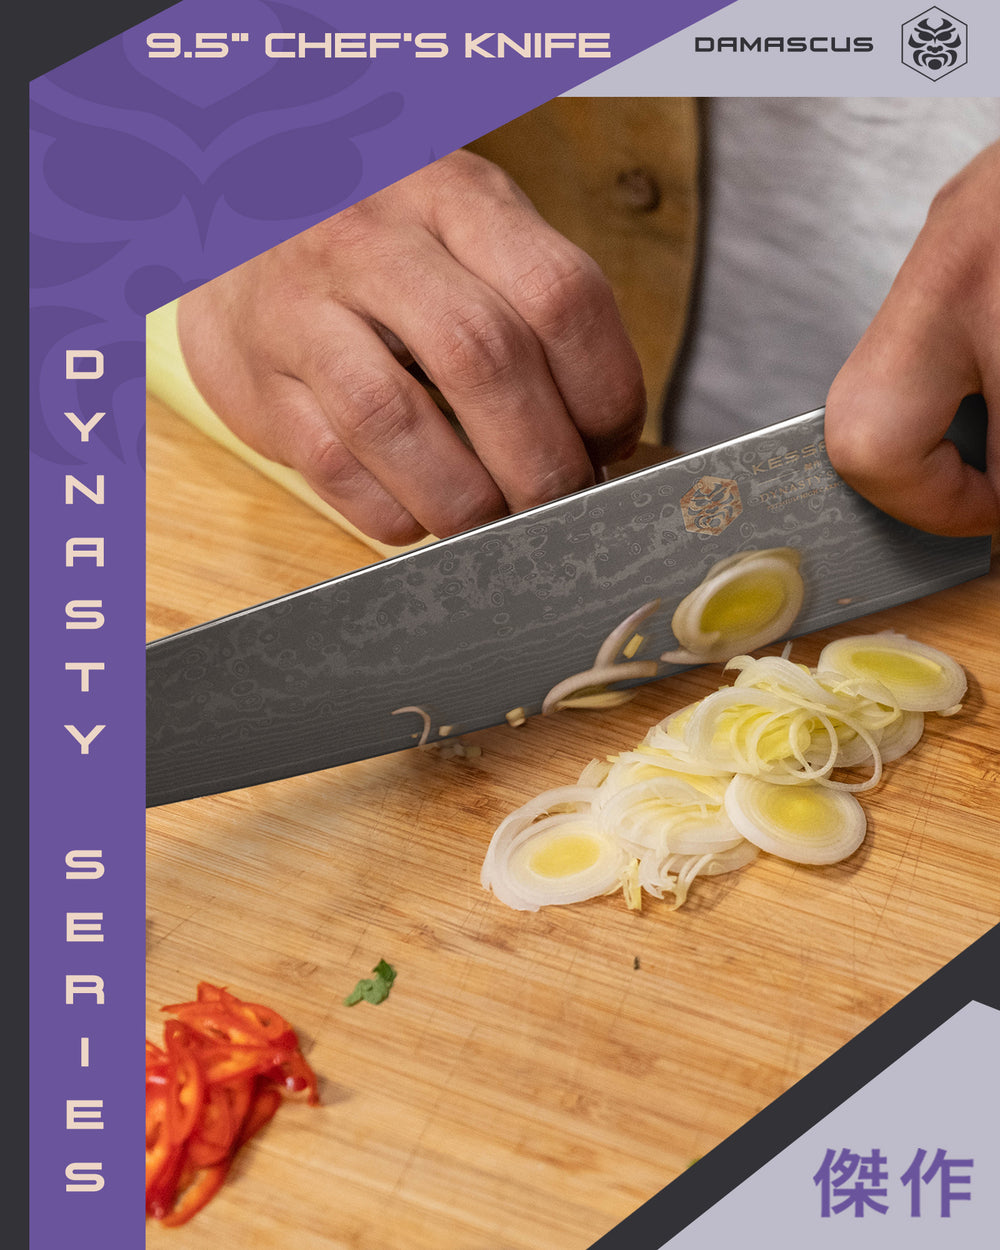 A chef chop vegetable with the 9.5" Damascus chef's knife